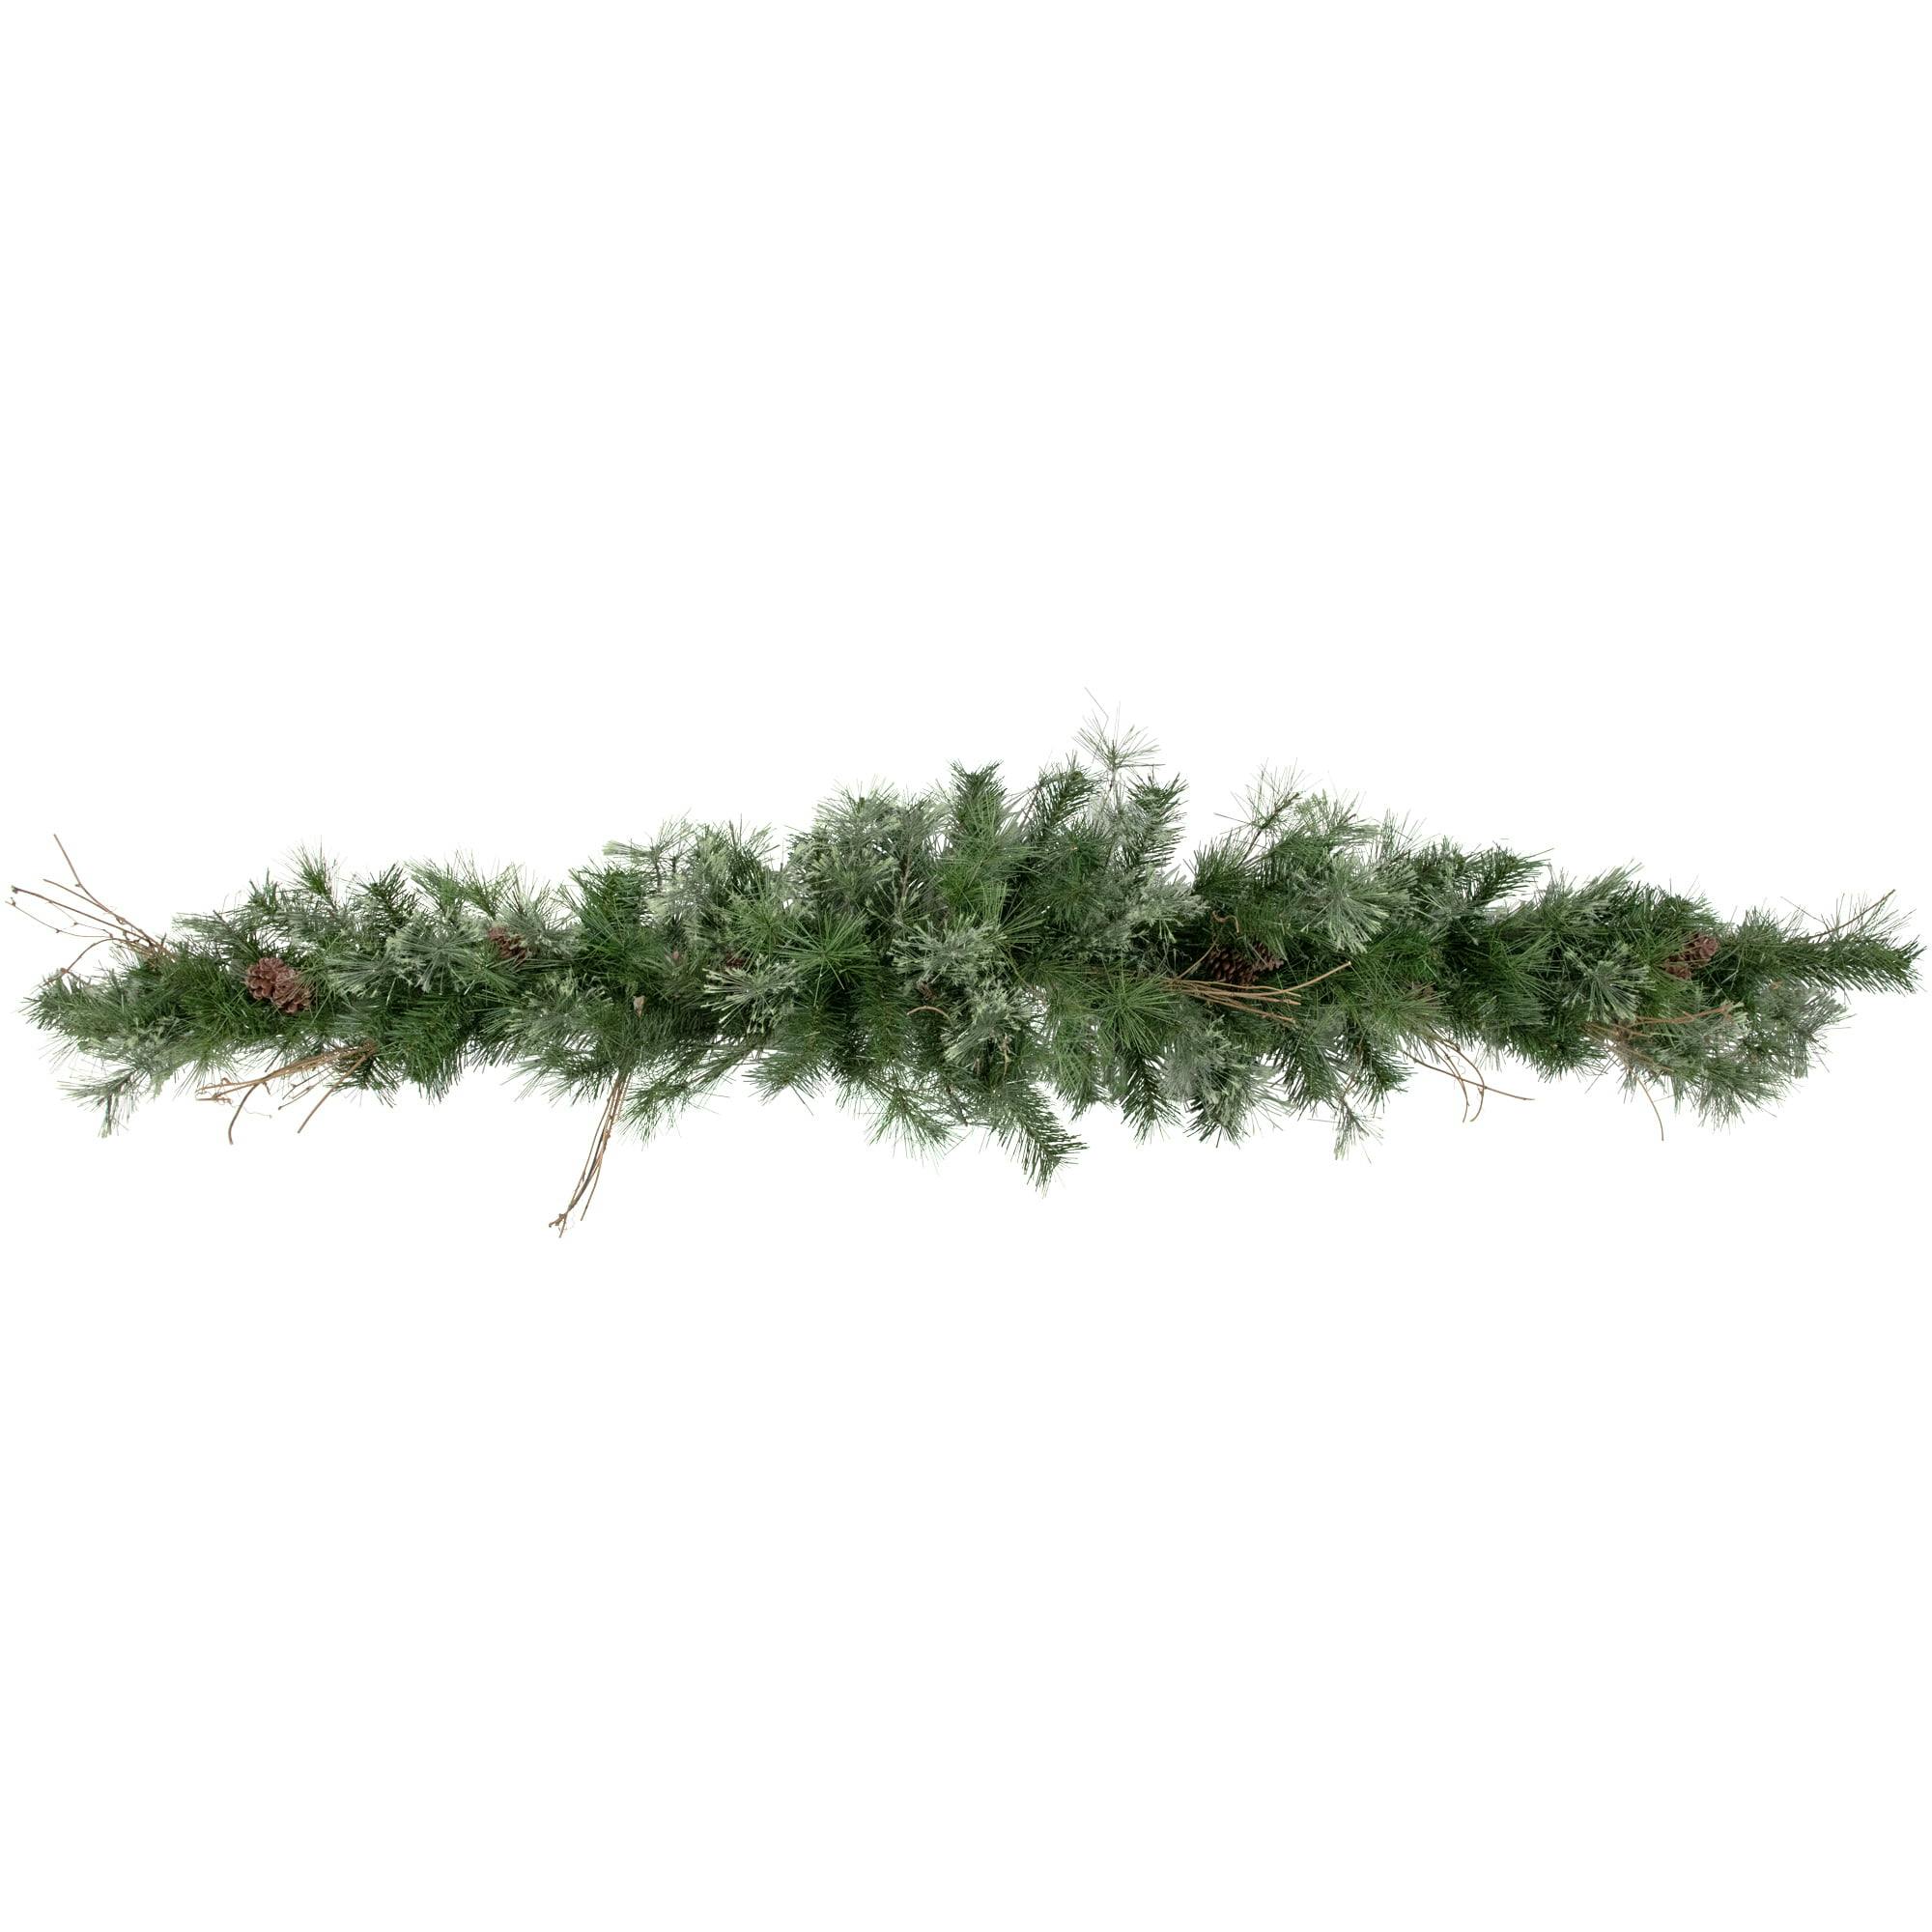 Country Mixed Pine Cone & Grapevine 6' Christmas Garland - Unlit